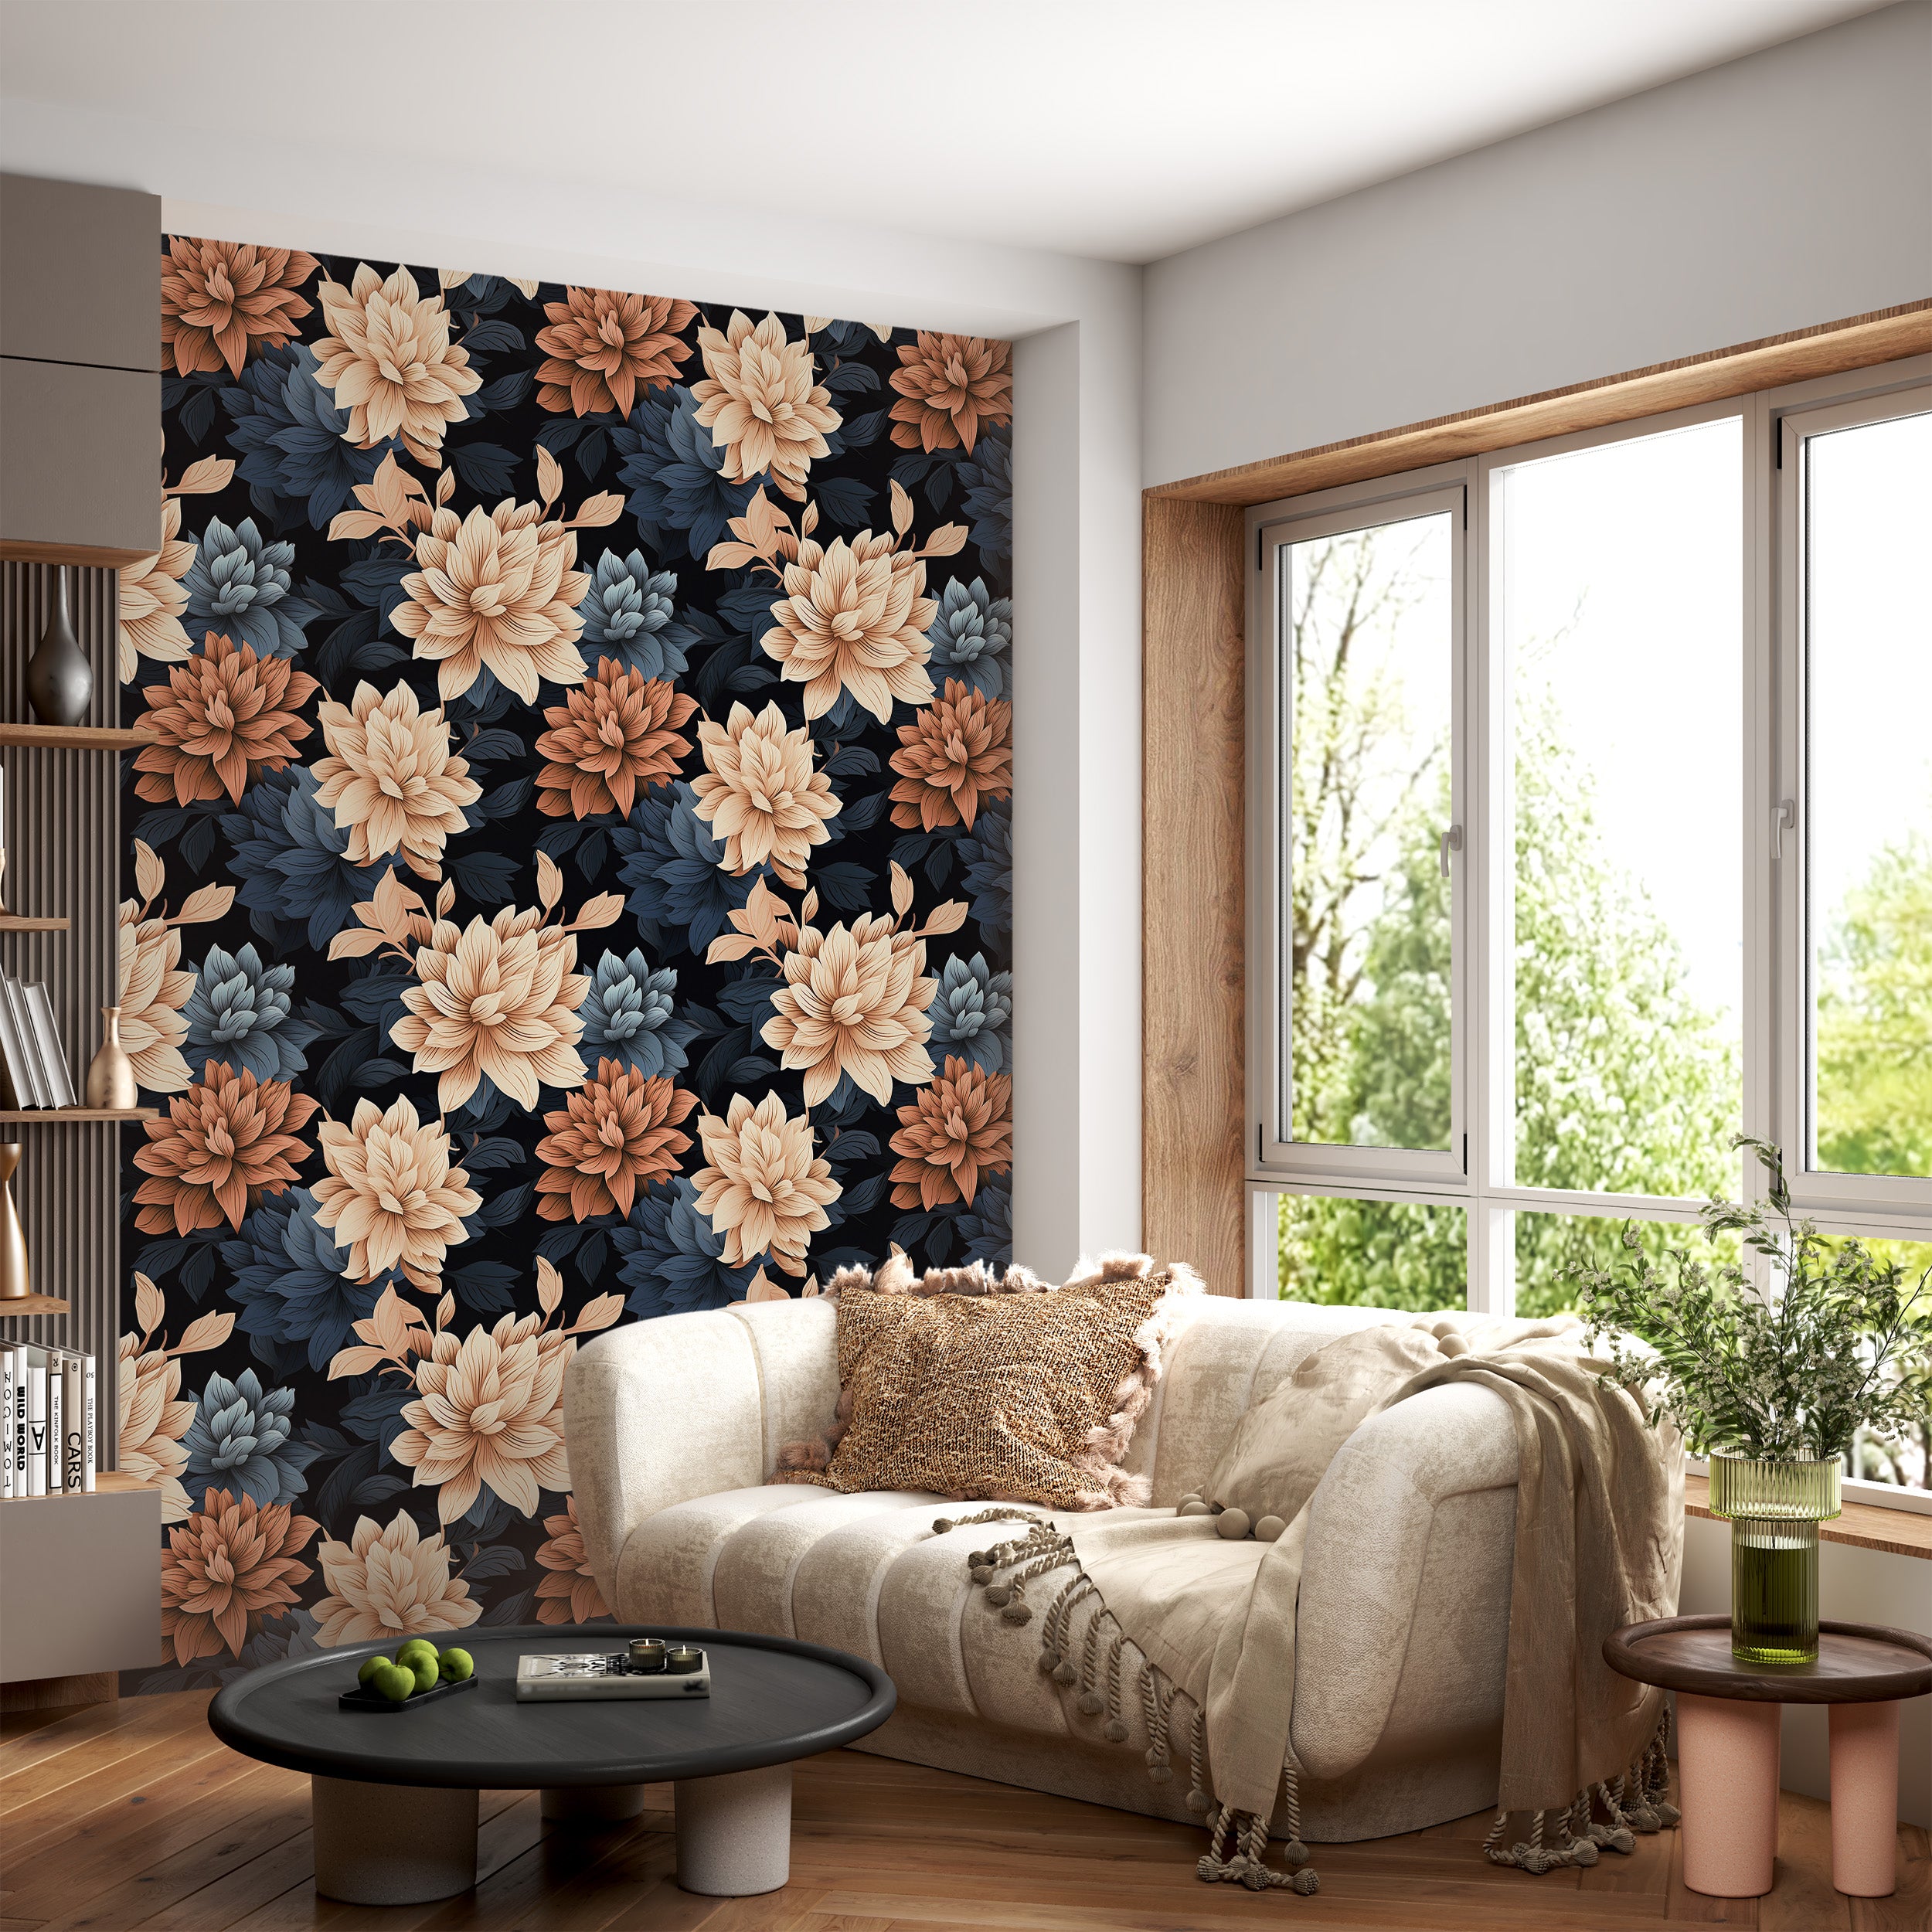 Effortless Application of Timeless Floral Wall Art